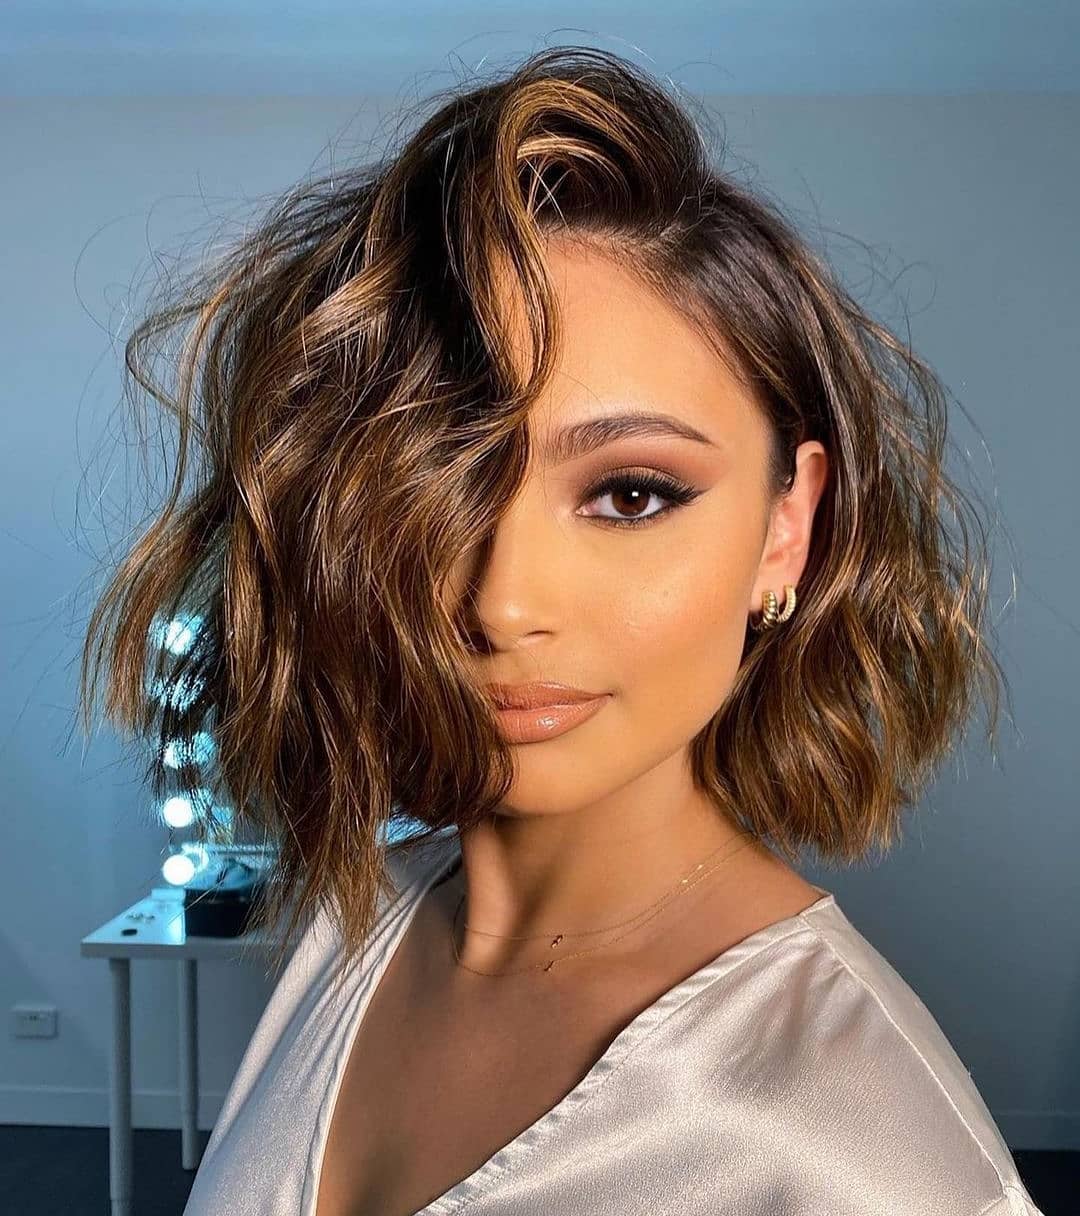 Short haircuts for curly hair: 16 fashion ideas for a playful look